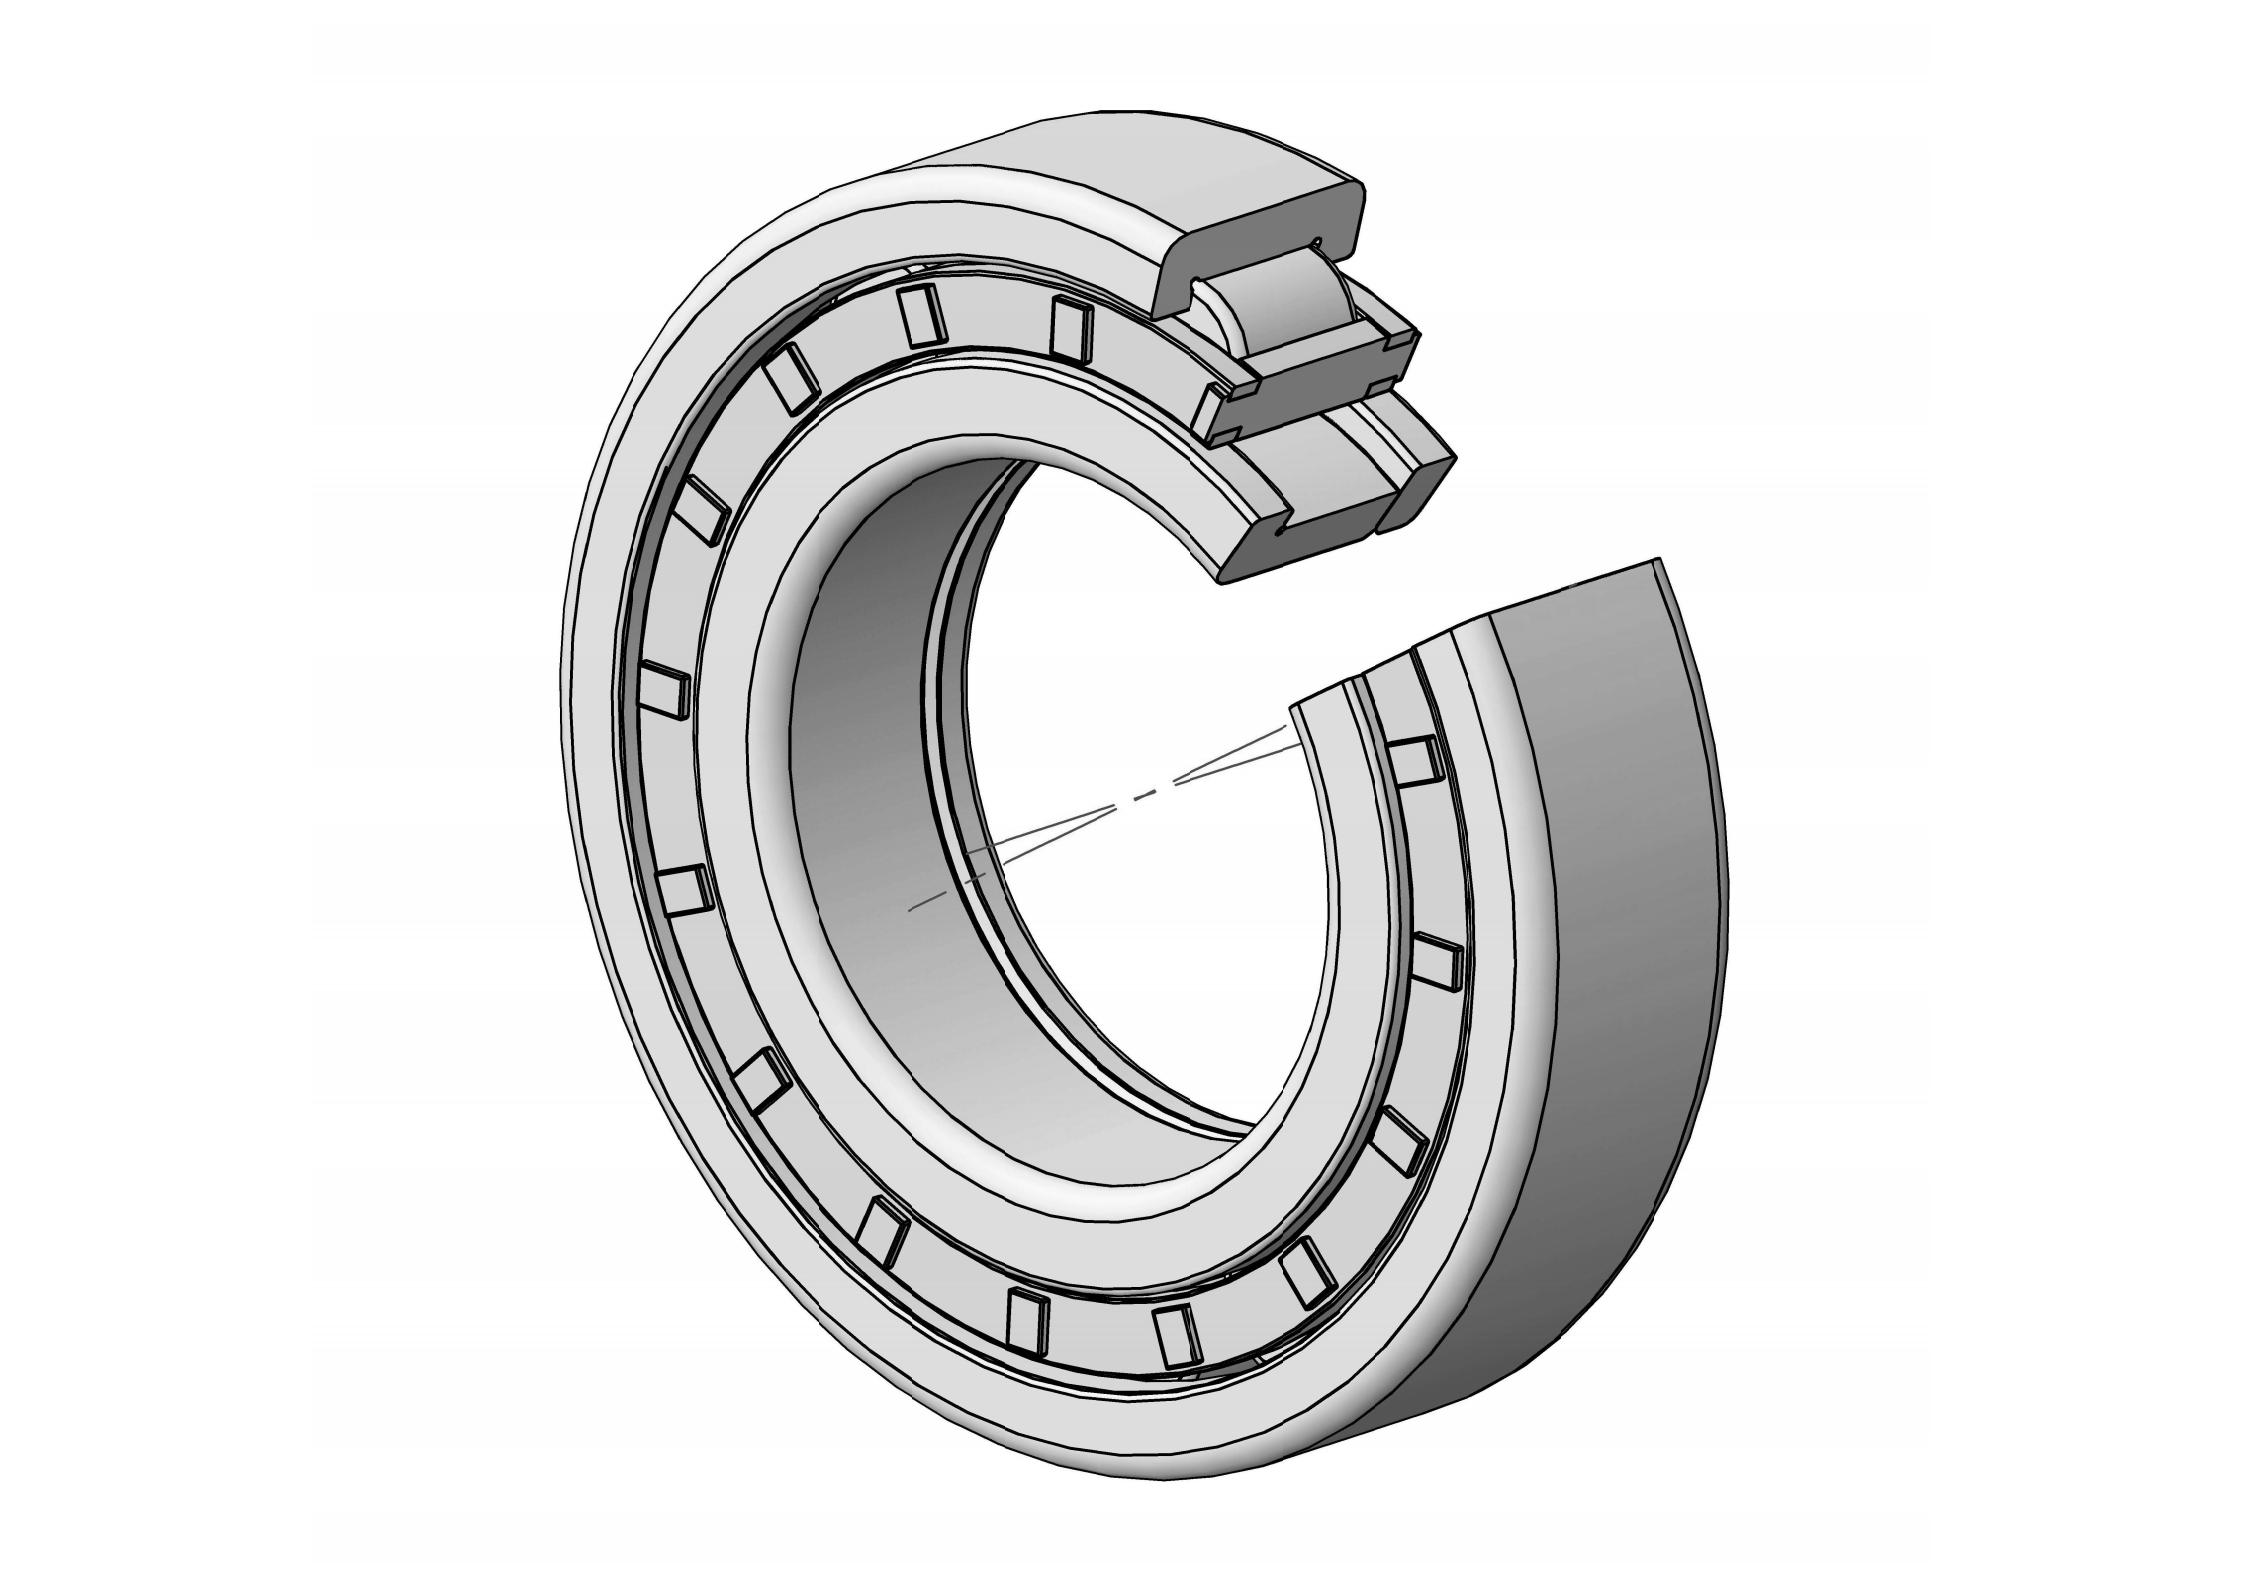 NUP2214-E Single Row Cylindrical roller bearing